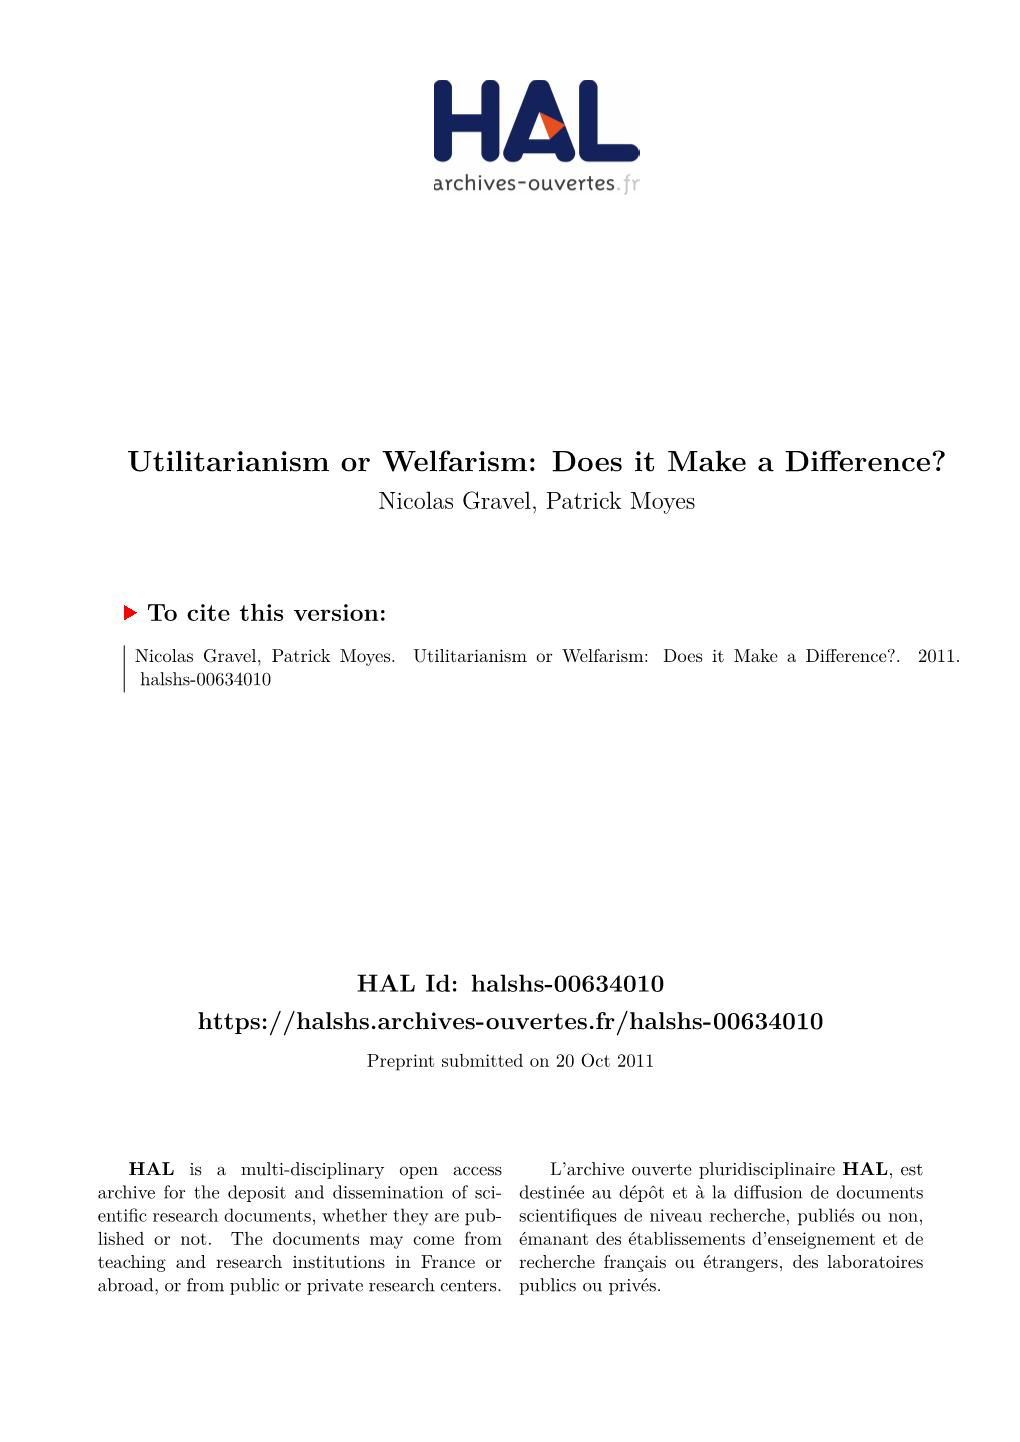 Utilitarianism Or Welfarism: Does It Make a Difference? Nicolas Gravel, Patrick Moyes